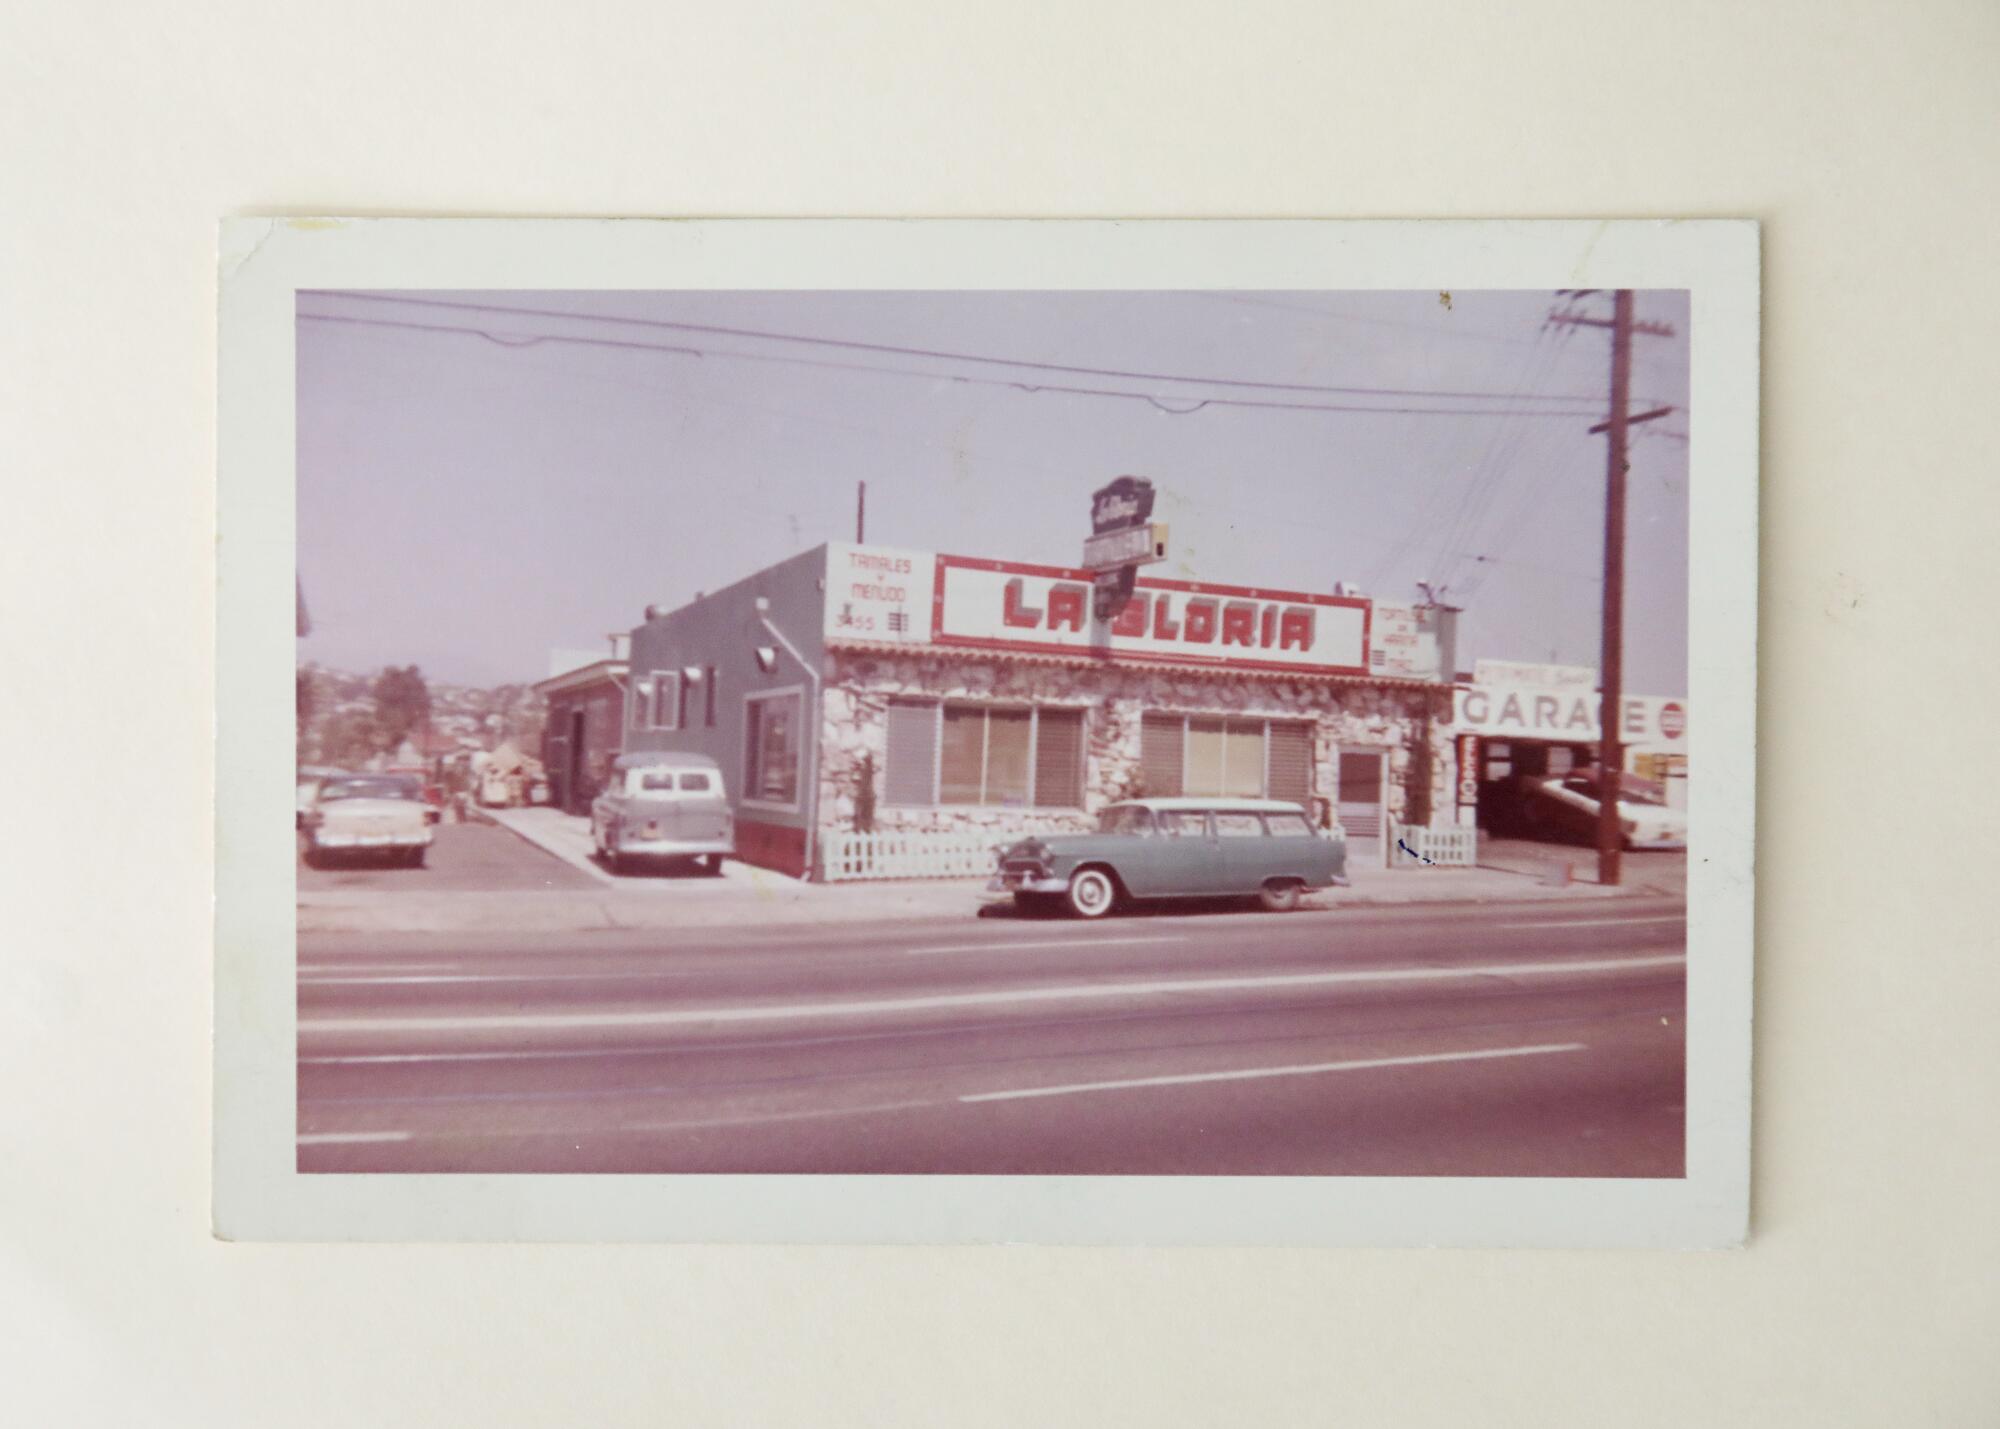 A photo of a photo that depicts a building with a "LA GLORIA" sign and an older-model car parked in front.